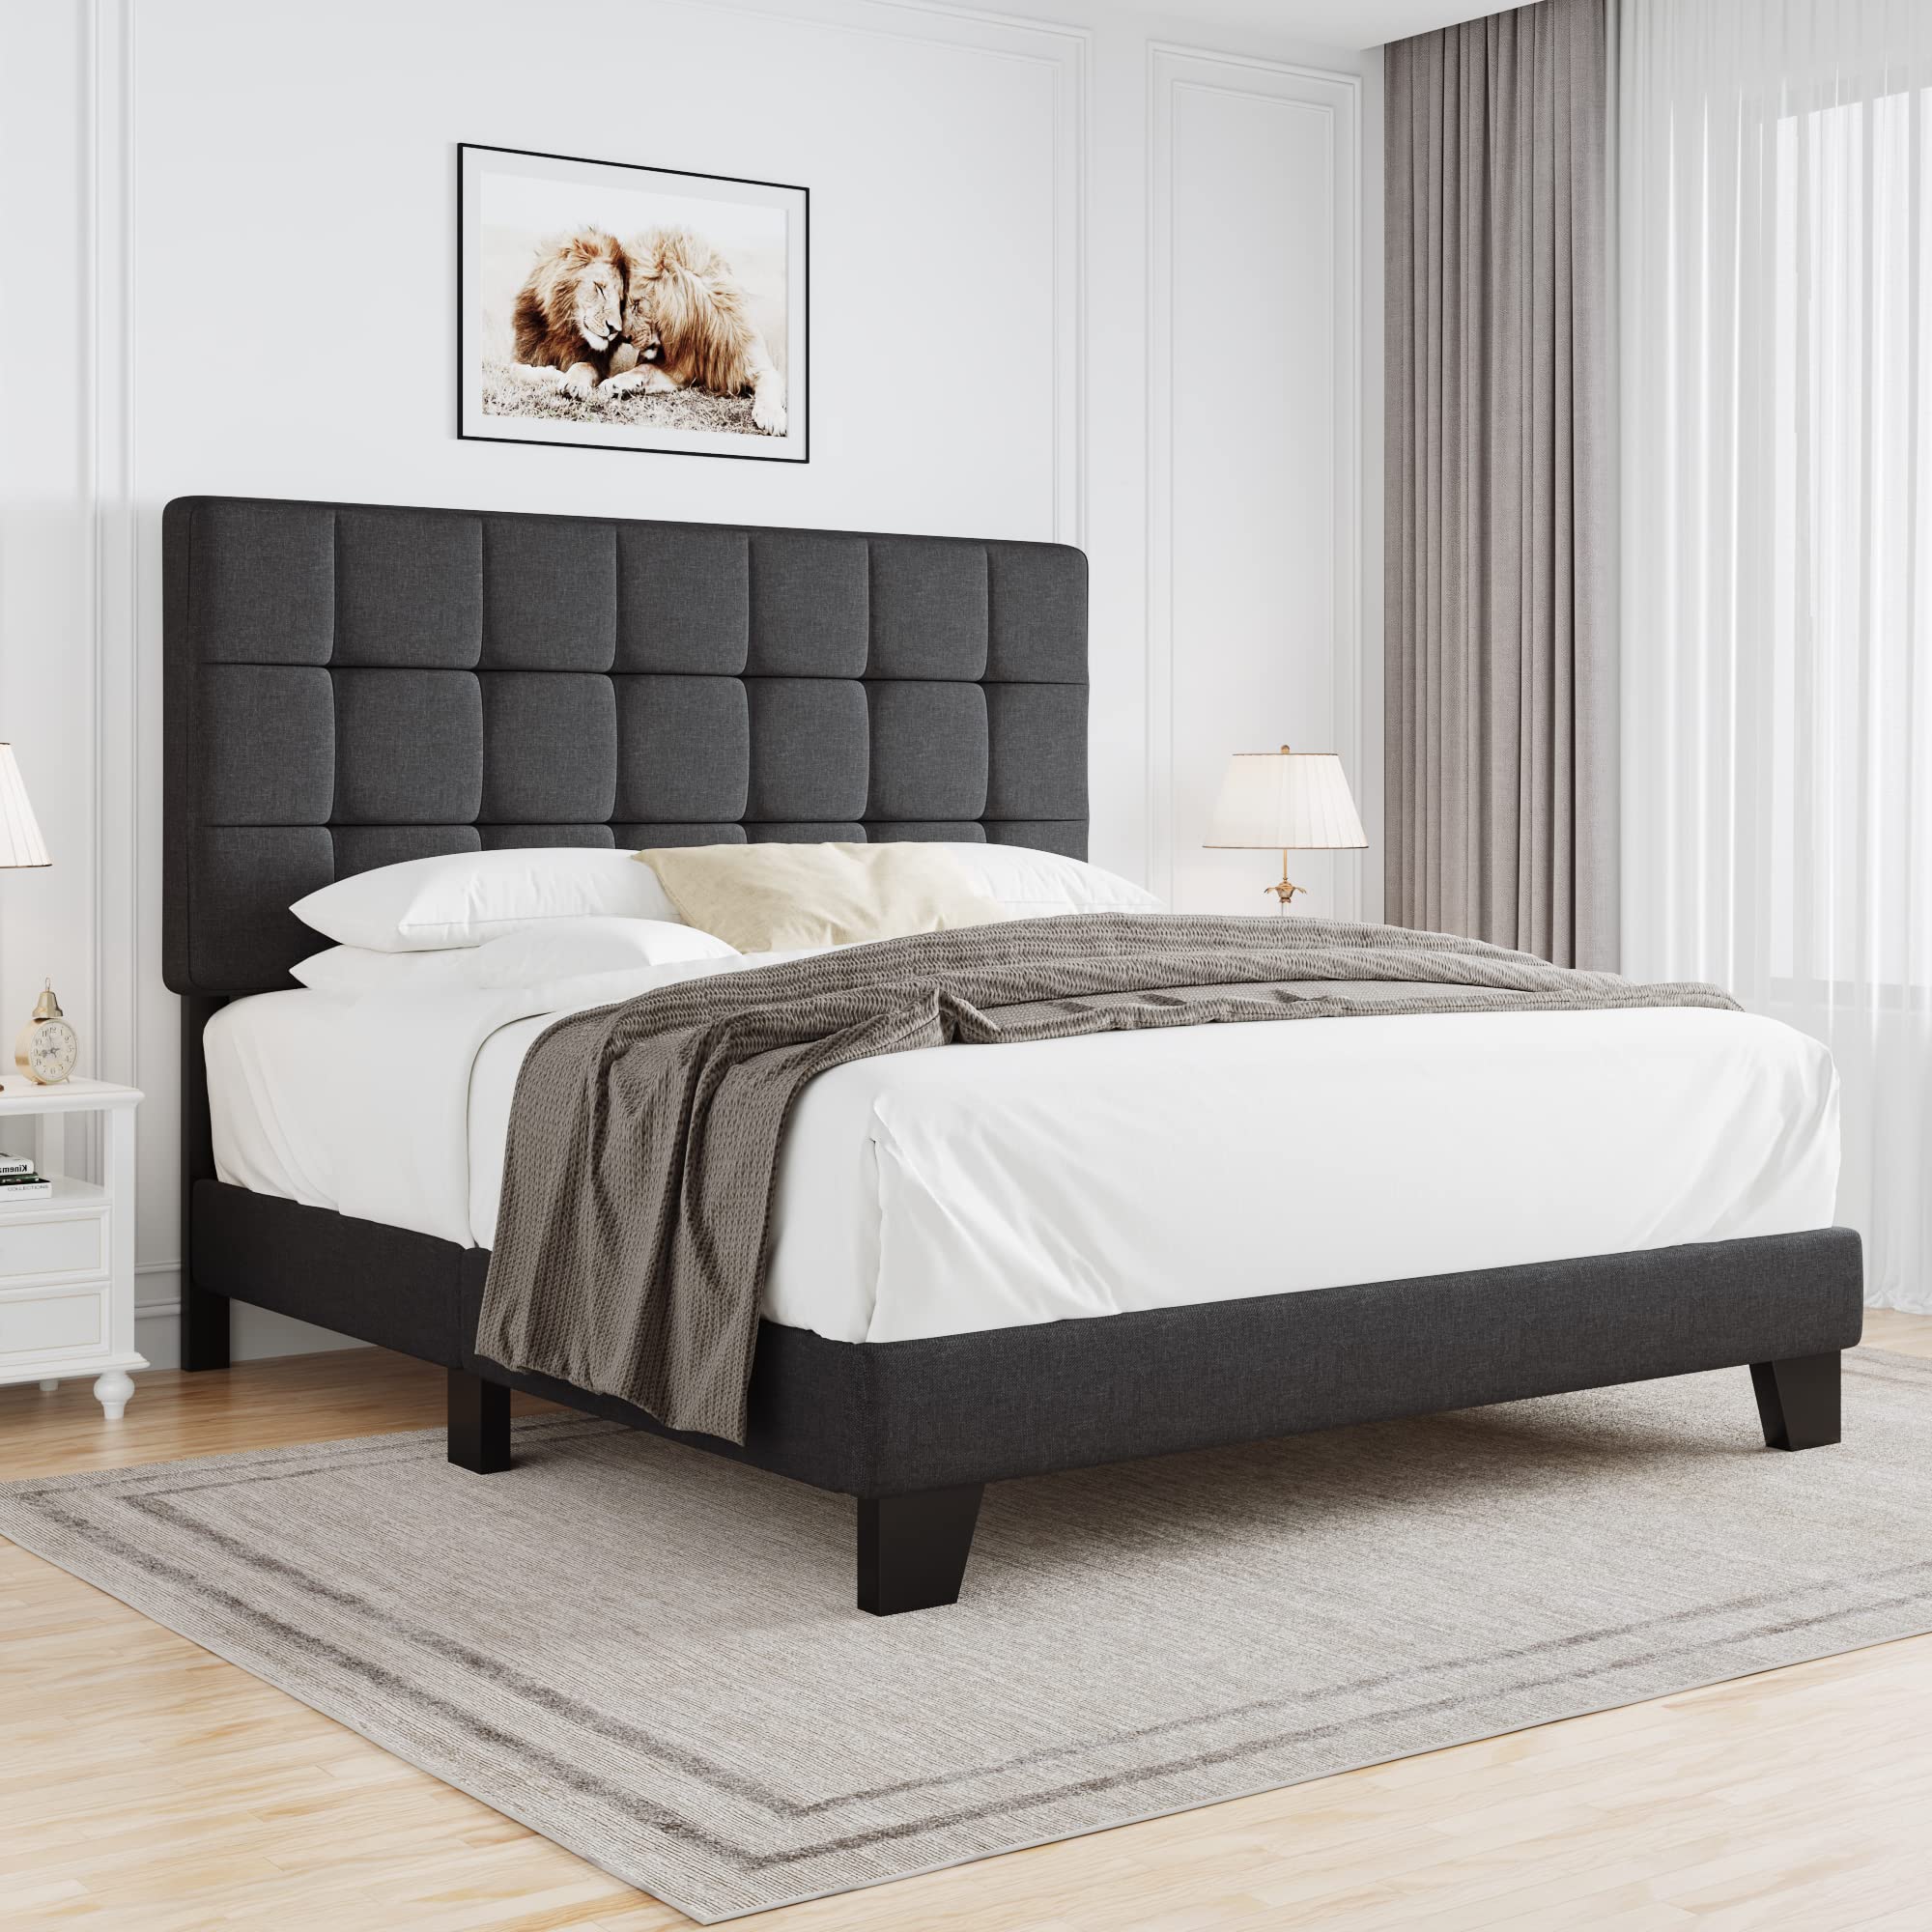 HOOMIc Full Size Upholstered Panel Bed with Adjustable Headboard, Full Bed Frame for Box Spring, Easy Assembly, grey Fabric